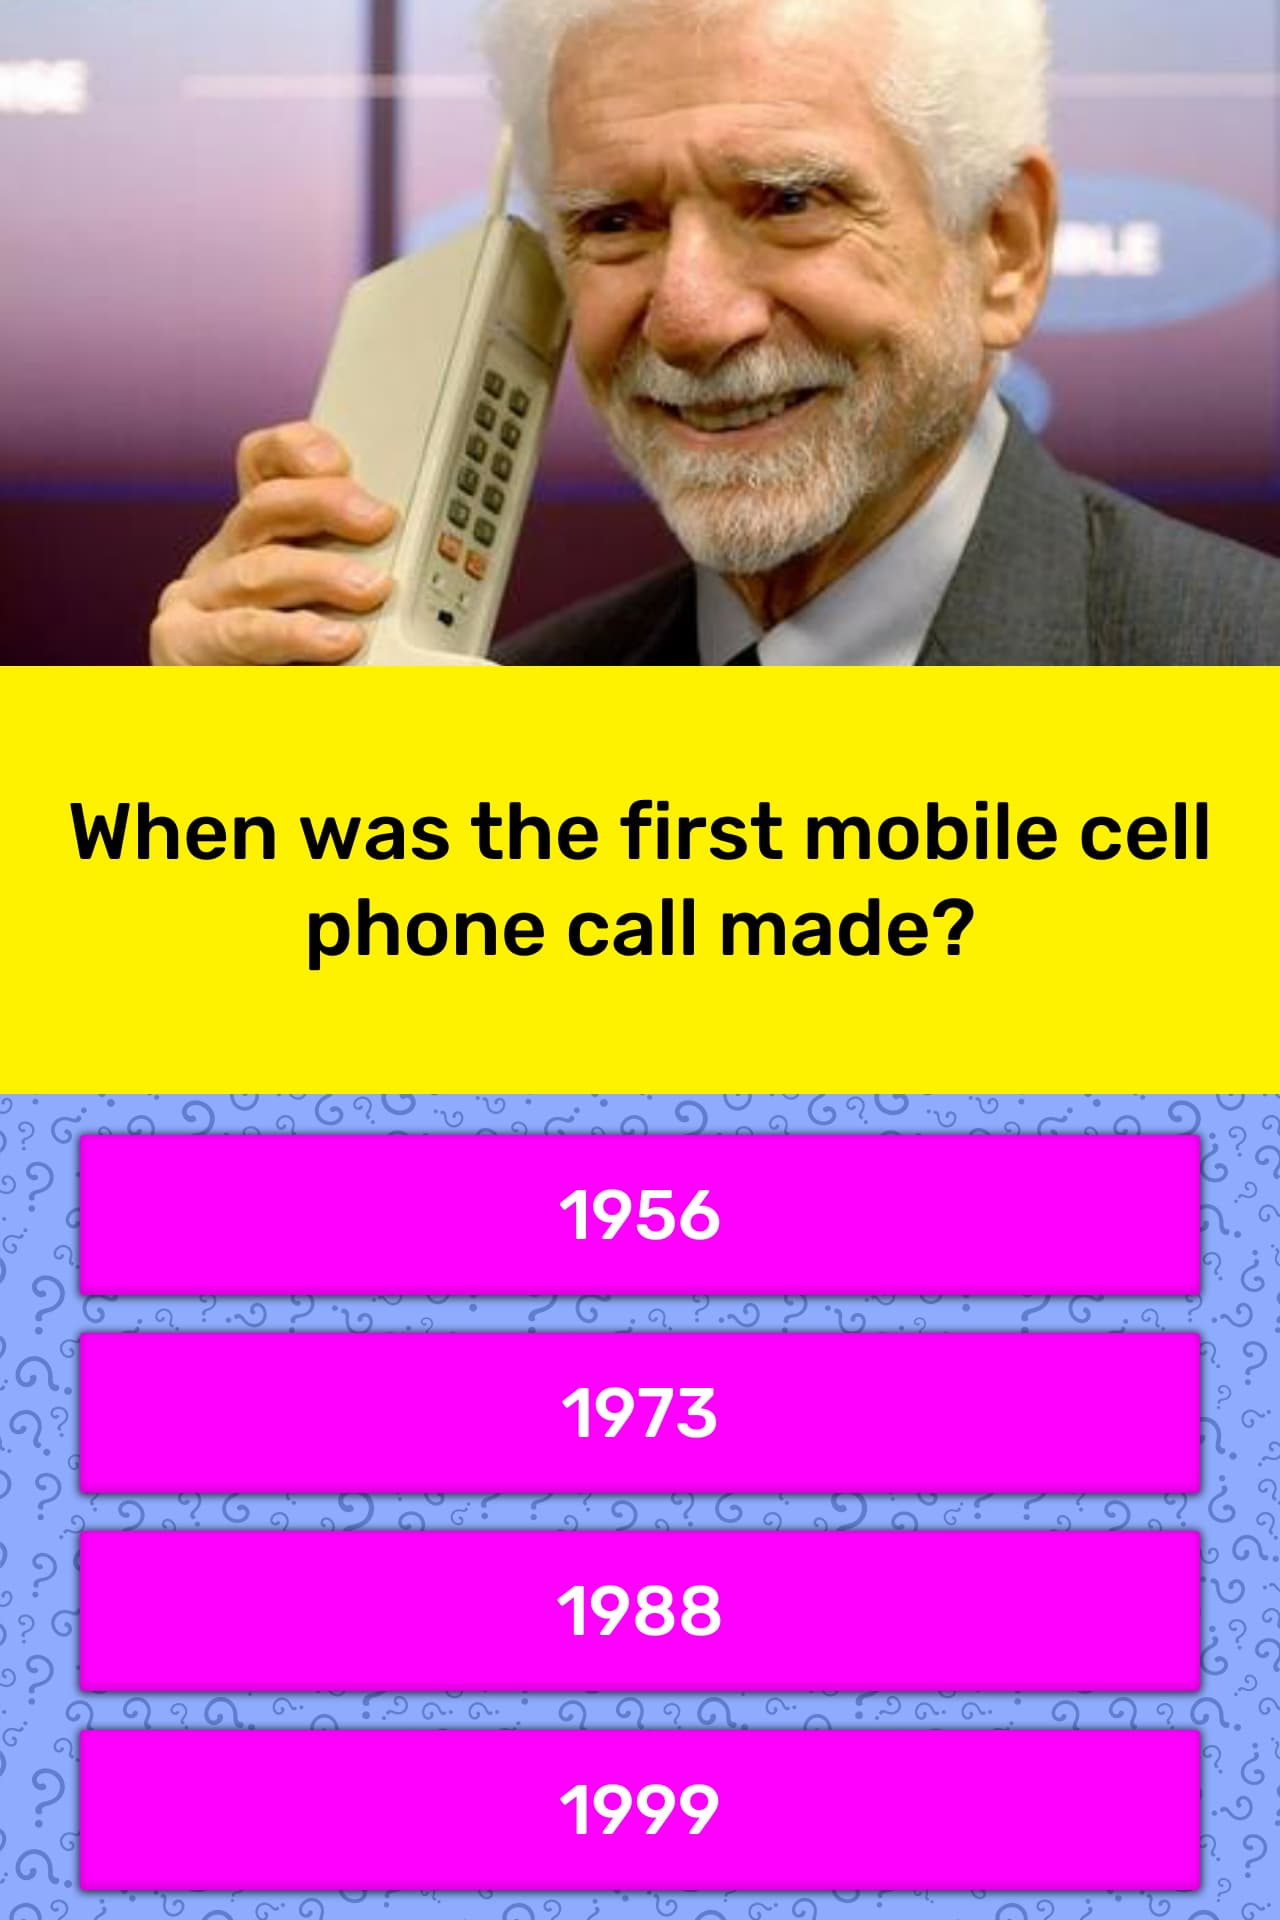 First mobile phone call ever made